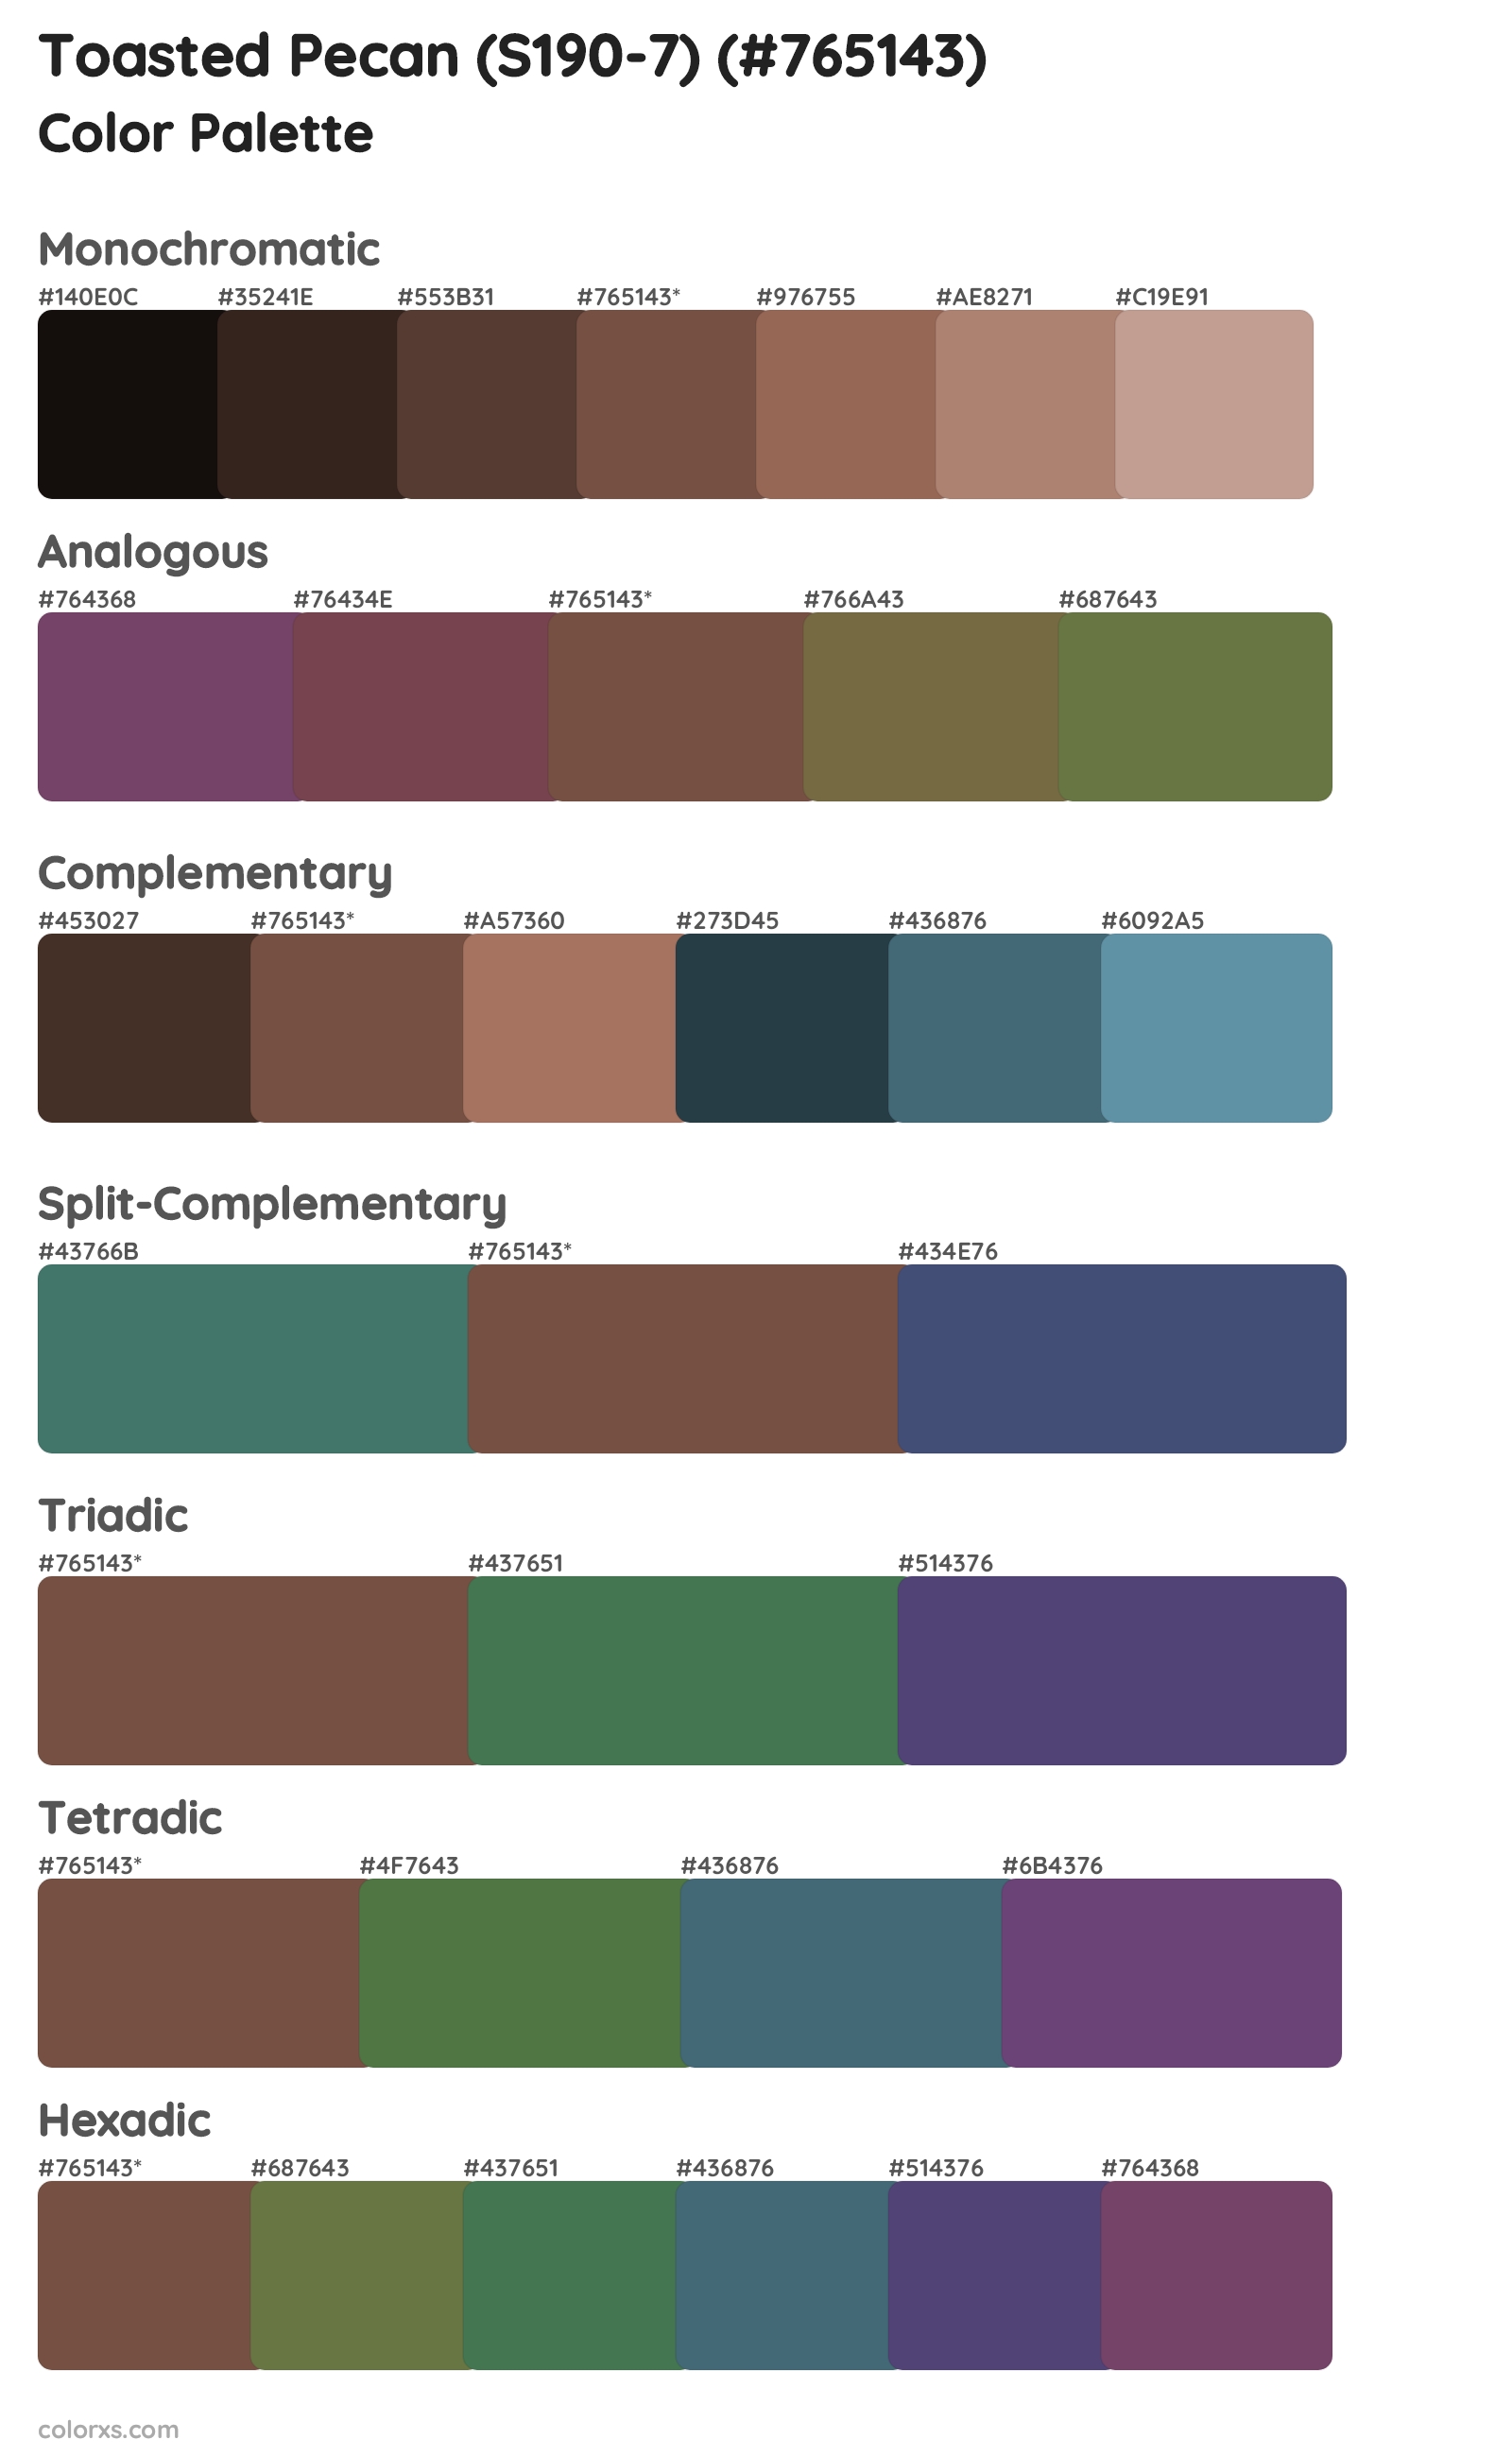 Toasted Pecan (S190-7) Color Scheme Palettes